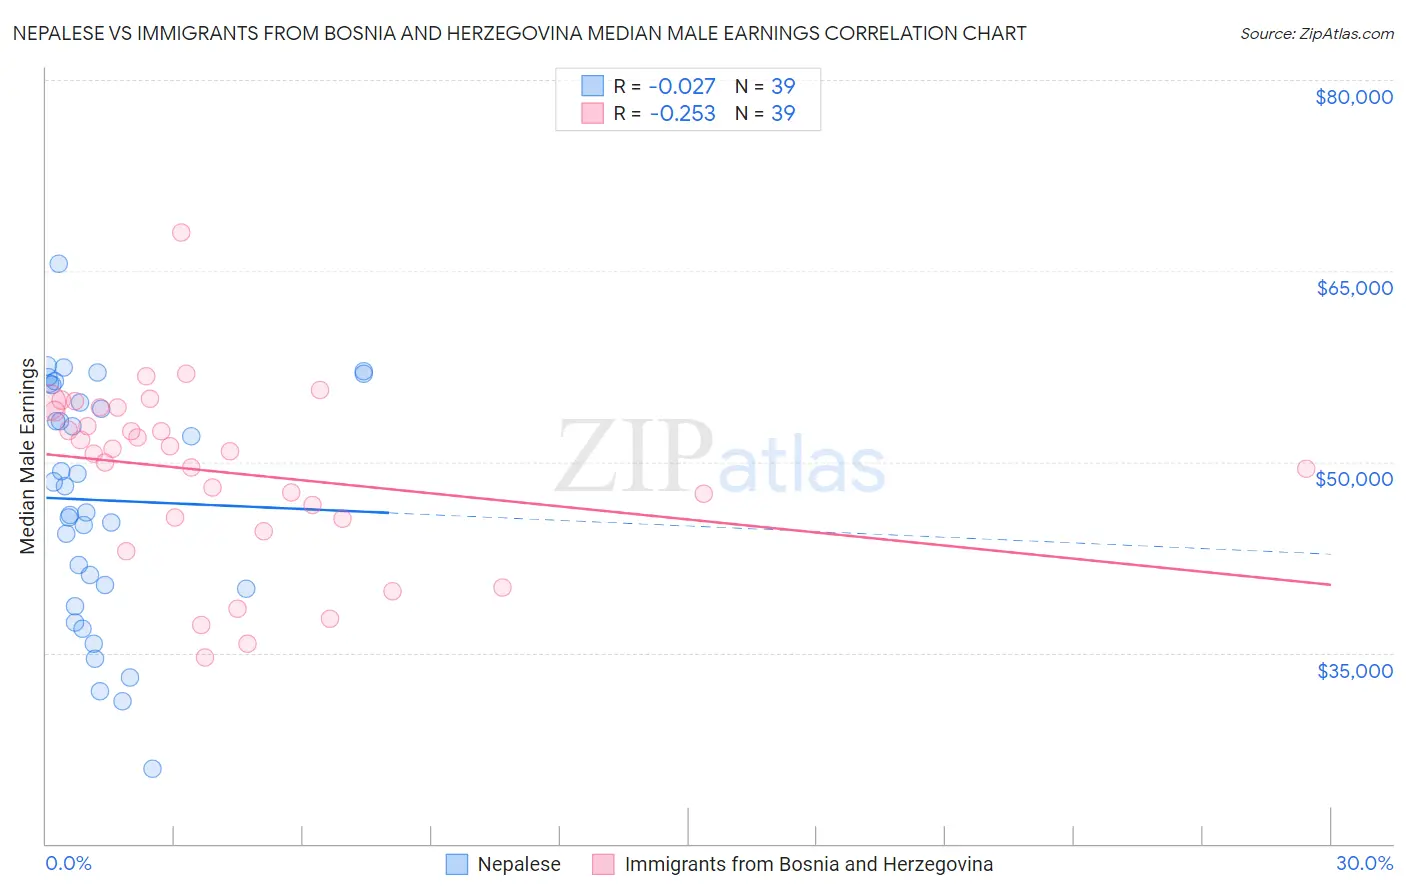 Nepalese vs Immigrants from Bosnia and Herzegovina Median Male Earnings